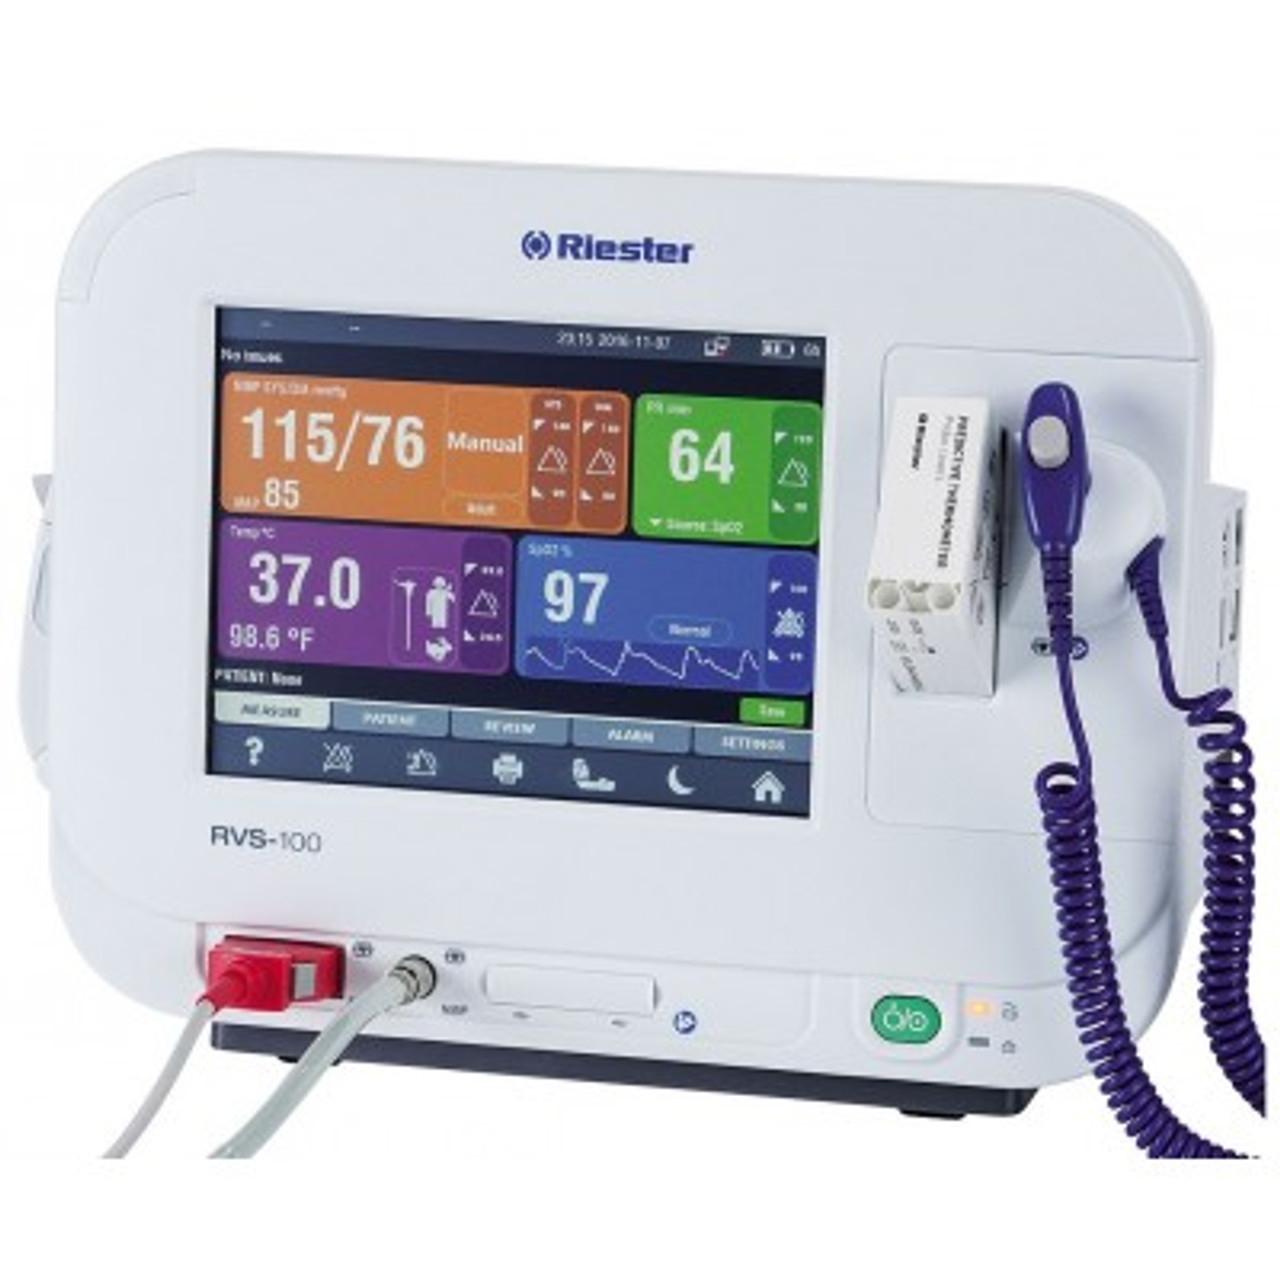 Riester RBP-100 Automatic Blood Pressure Monitor